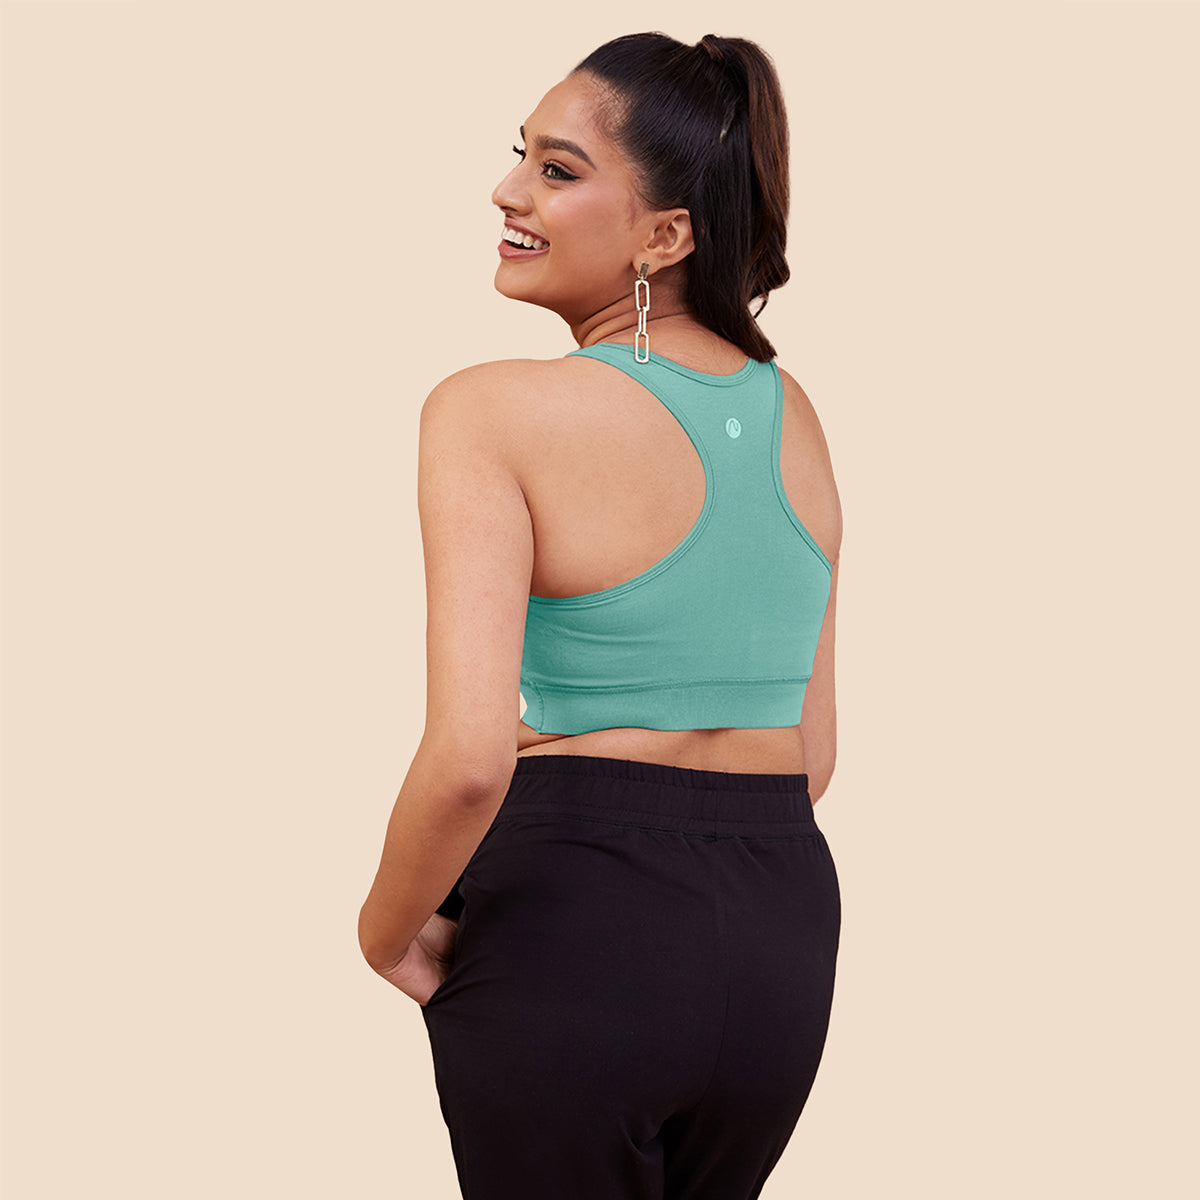 Nykd All day Essential Cotton Sports Bra-NYK059 Peacoat – Nykd by Nykaa